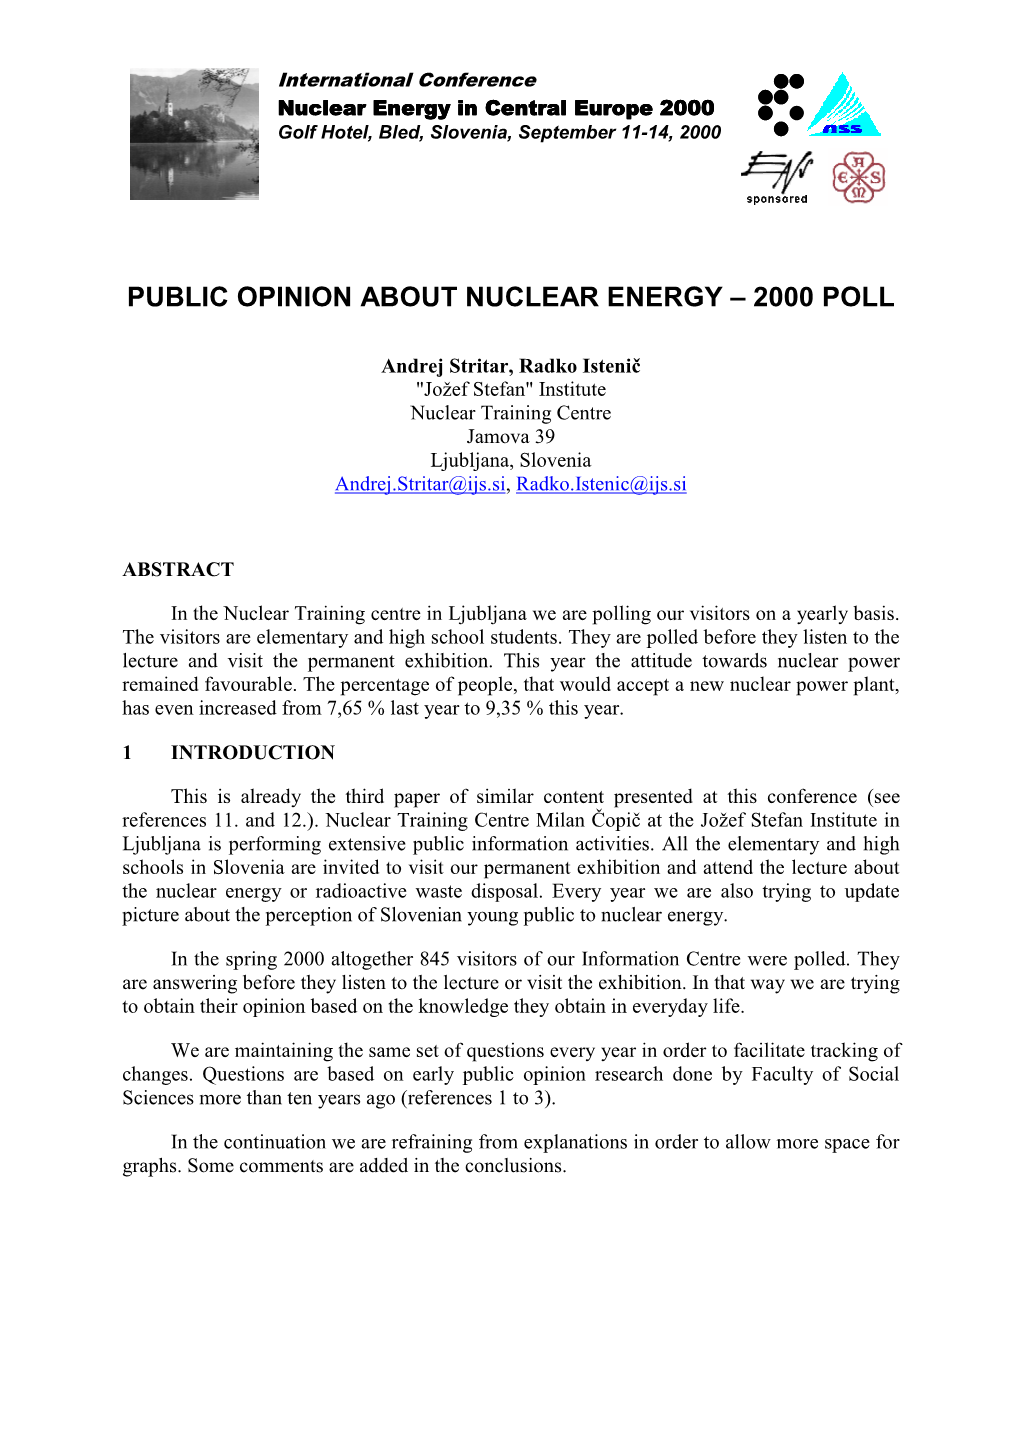 Public Opinion About Nuclear Energy – 2000 Poll